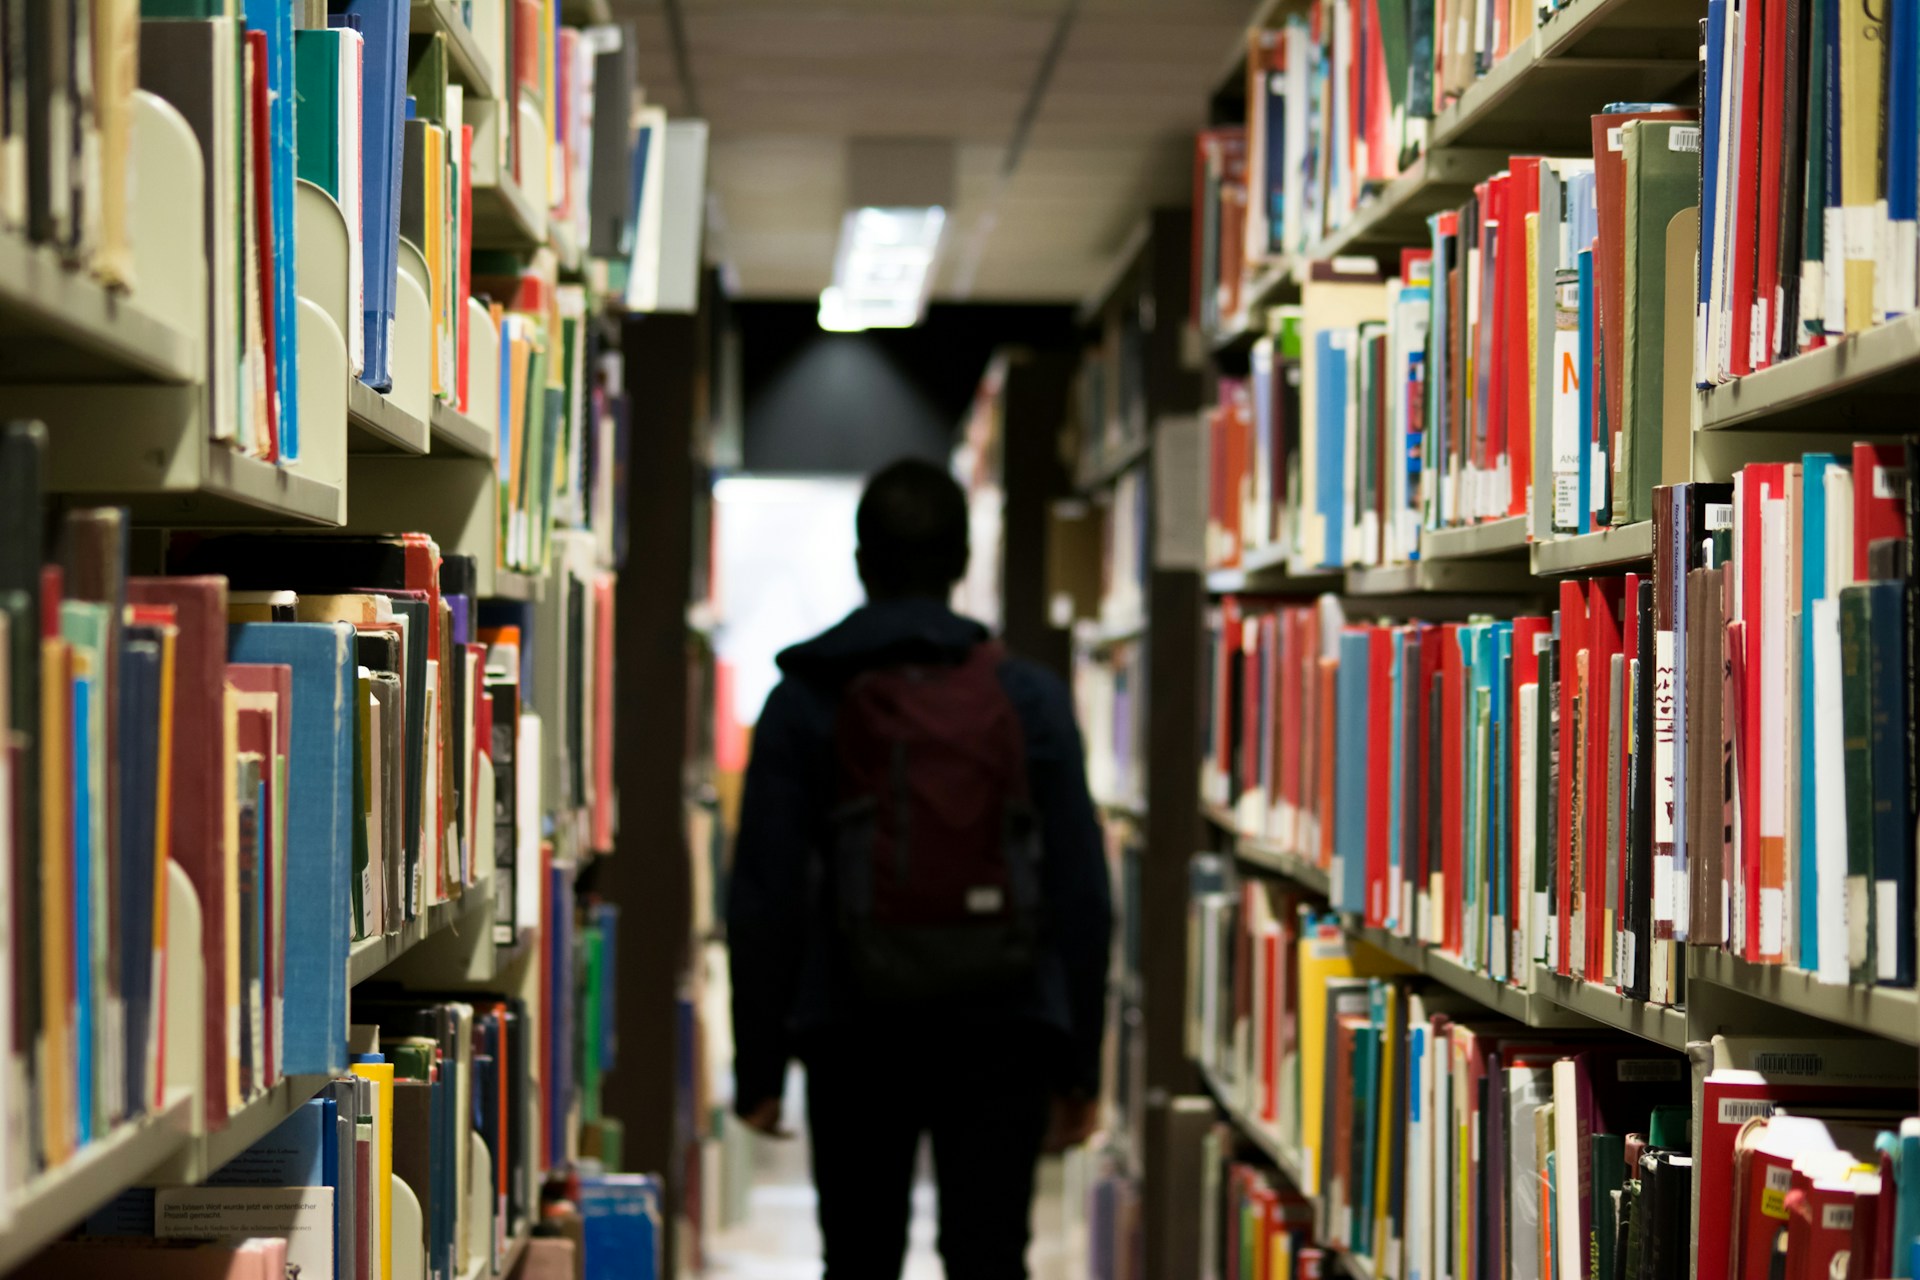 Image of a person walking between shelves of books in a library.